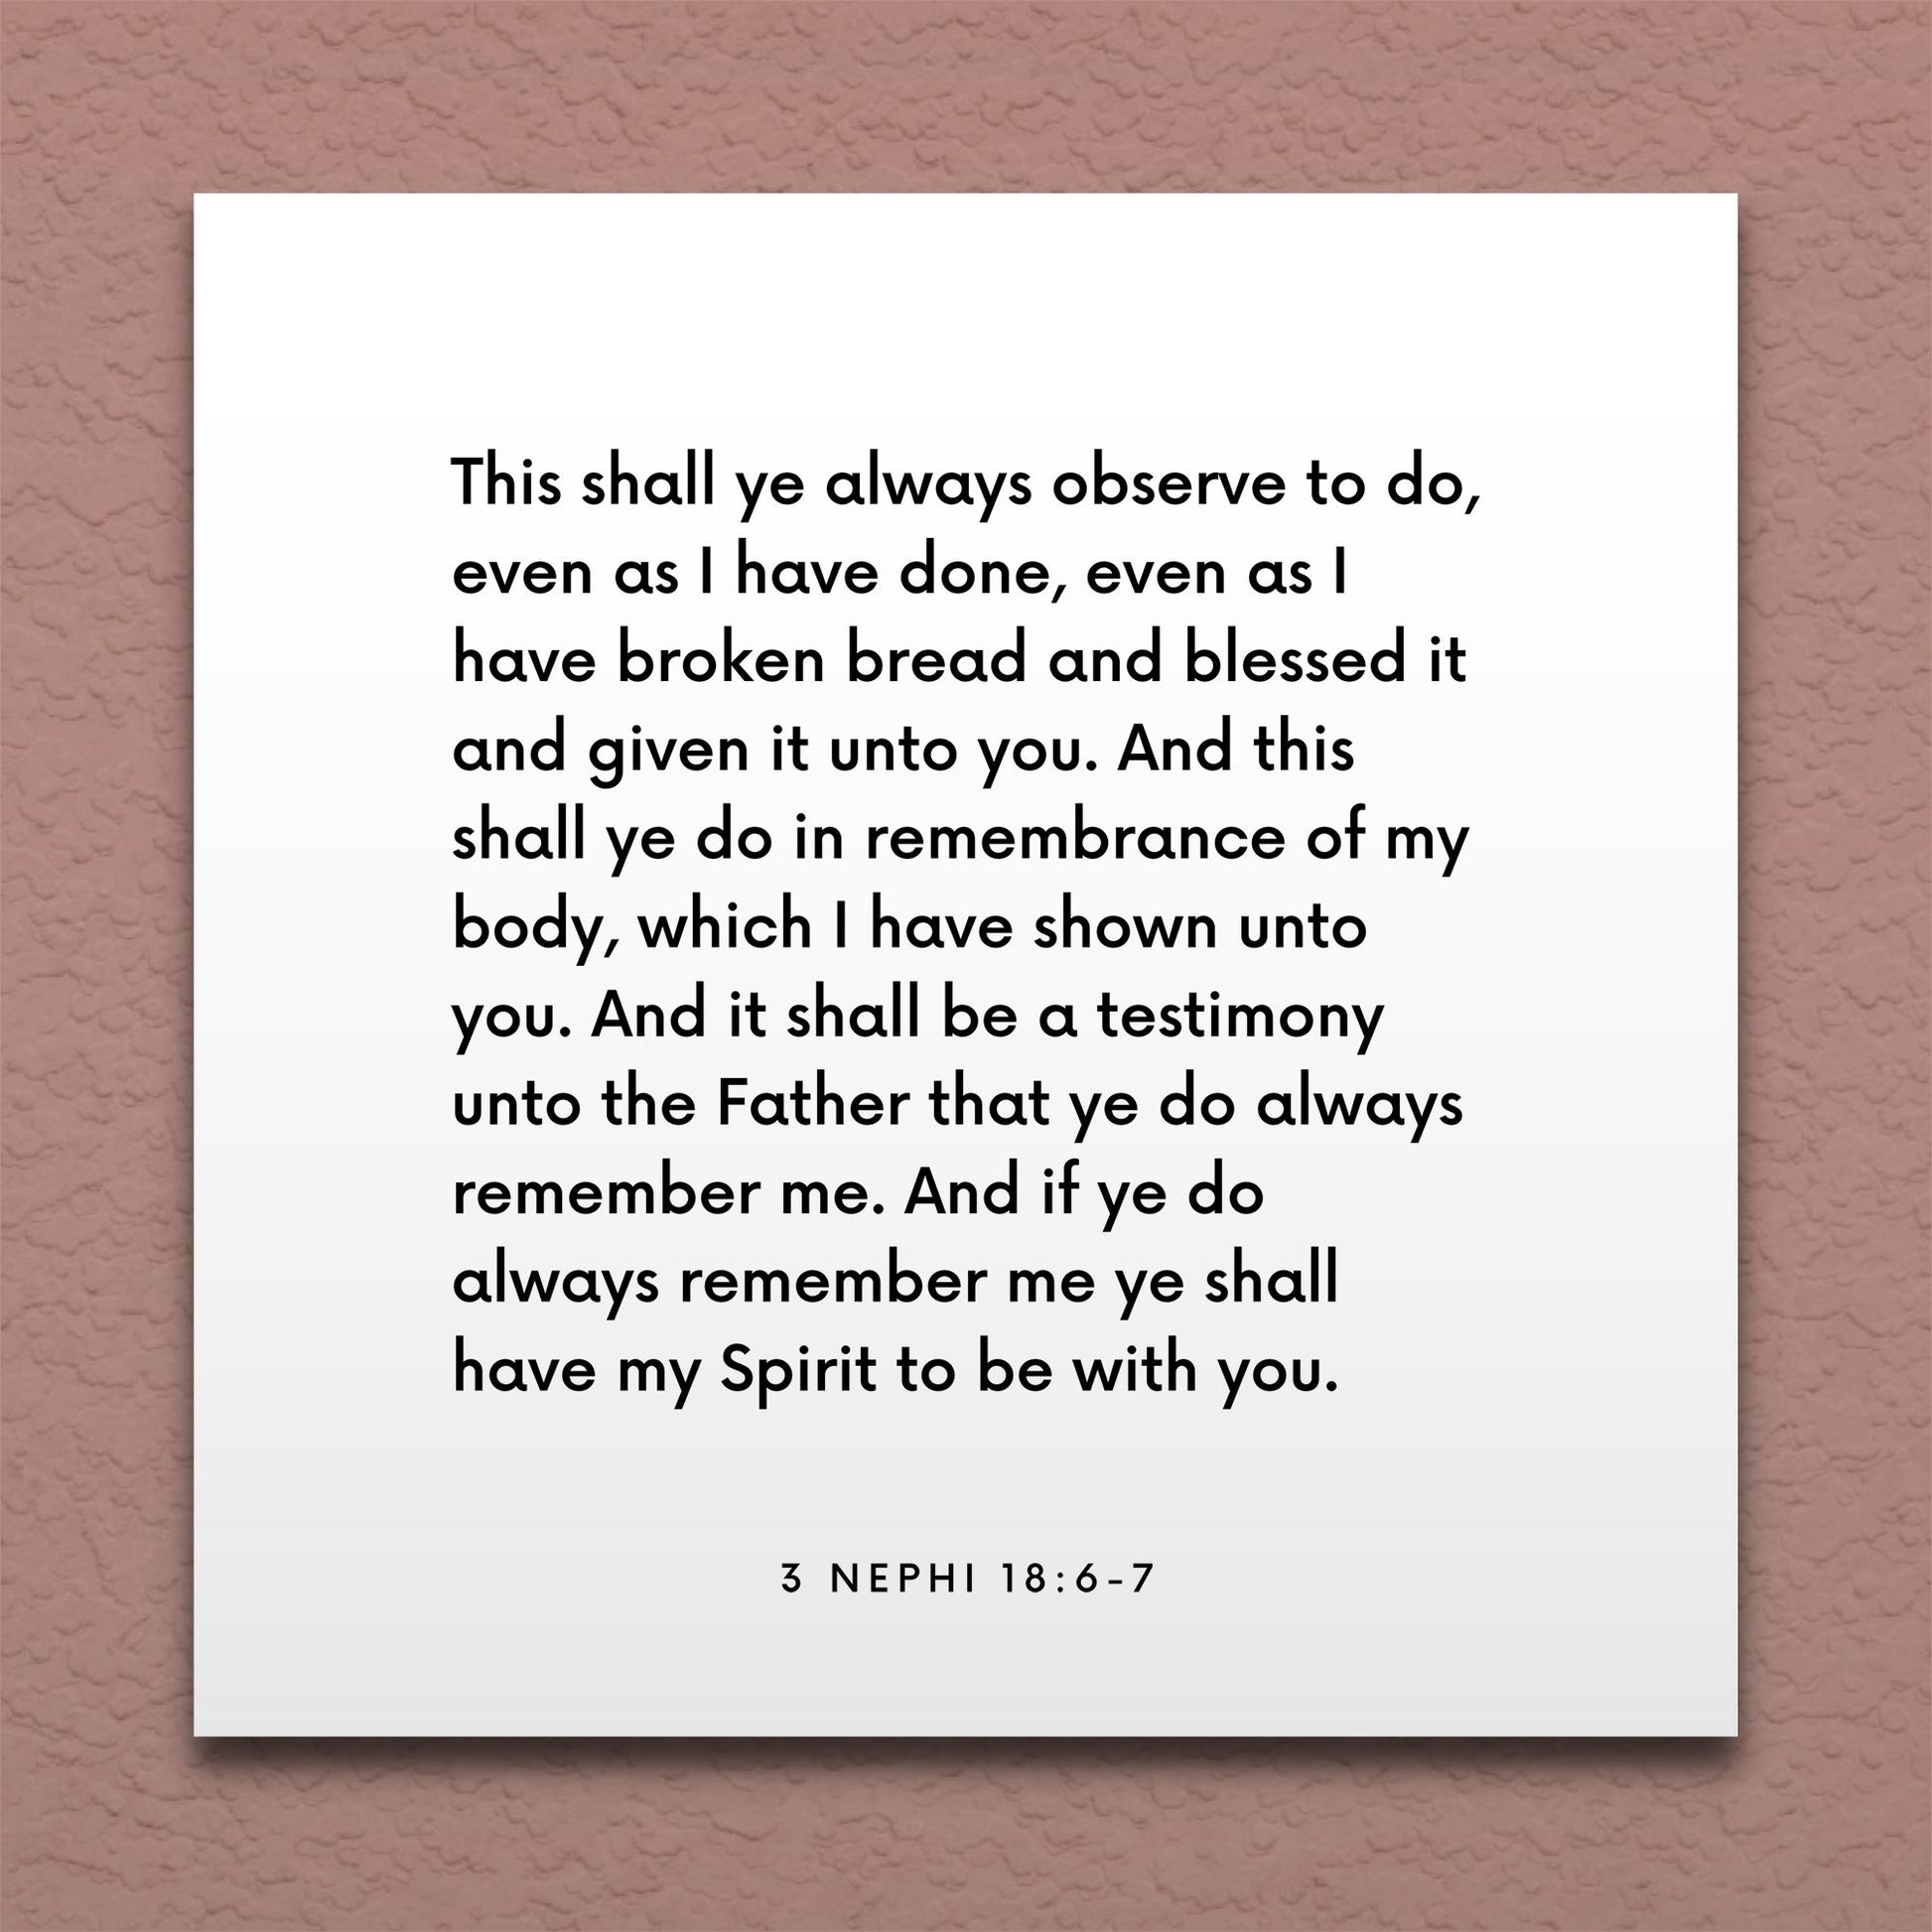 Wall-mounted scripture tile for 3 Nephi 18:6-7 - "This shall ye do in remembrance of my body"